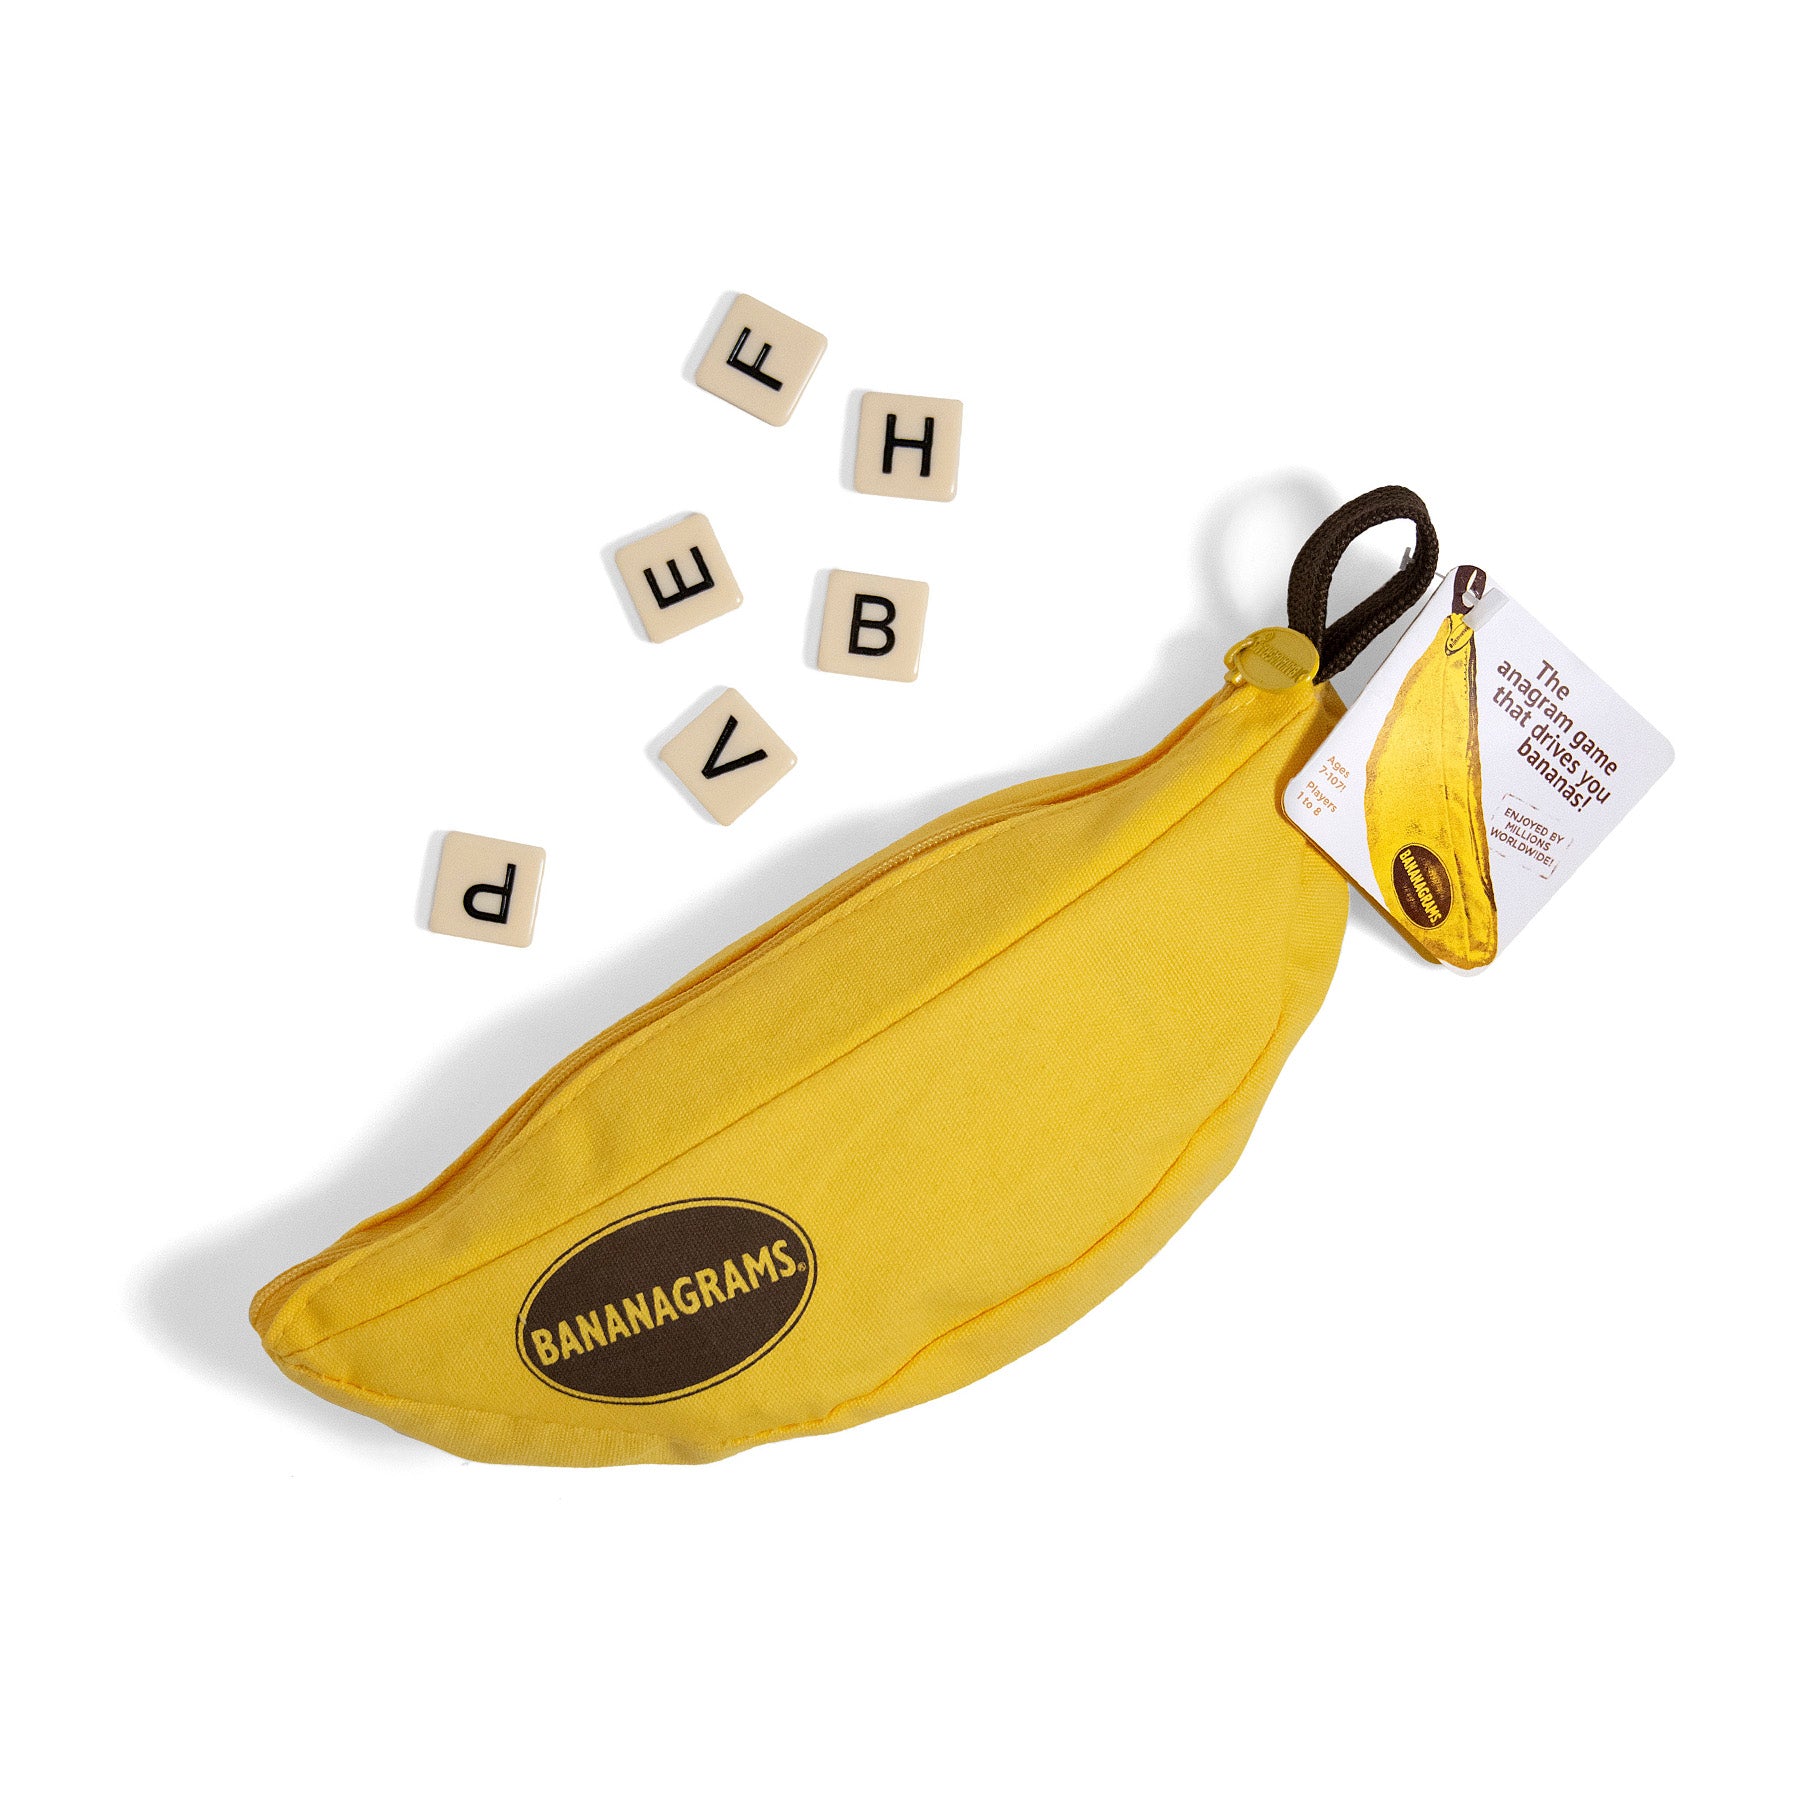 Bananagrams Rules Made Simple: Everything You Need to Know